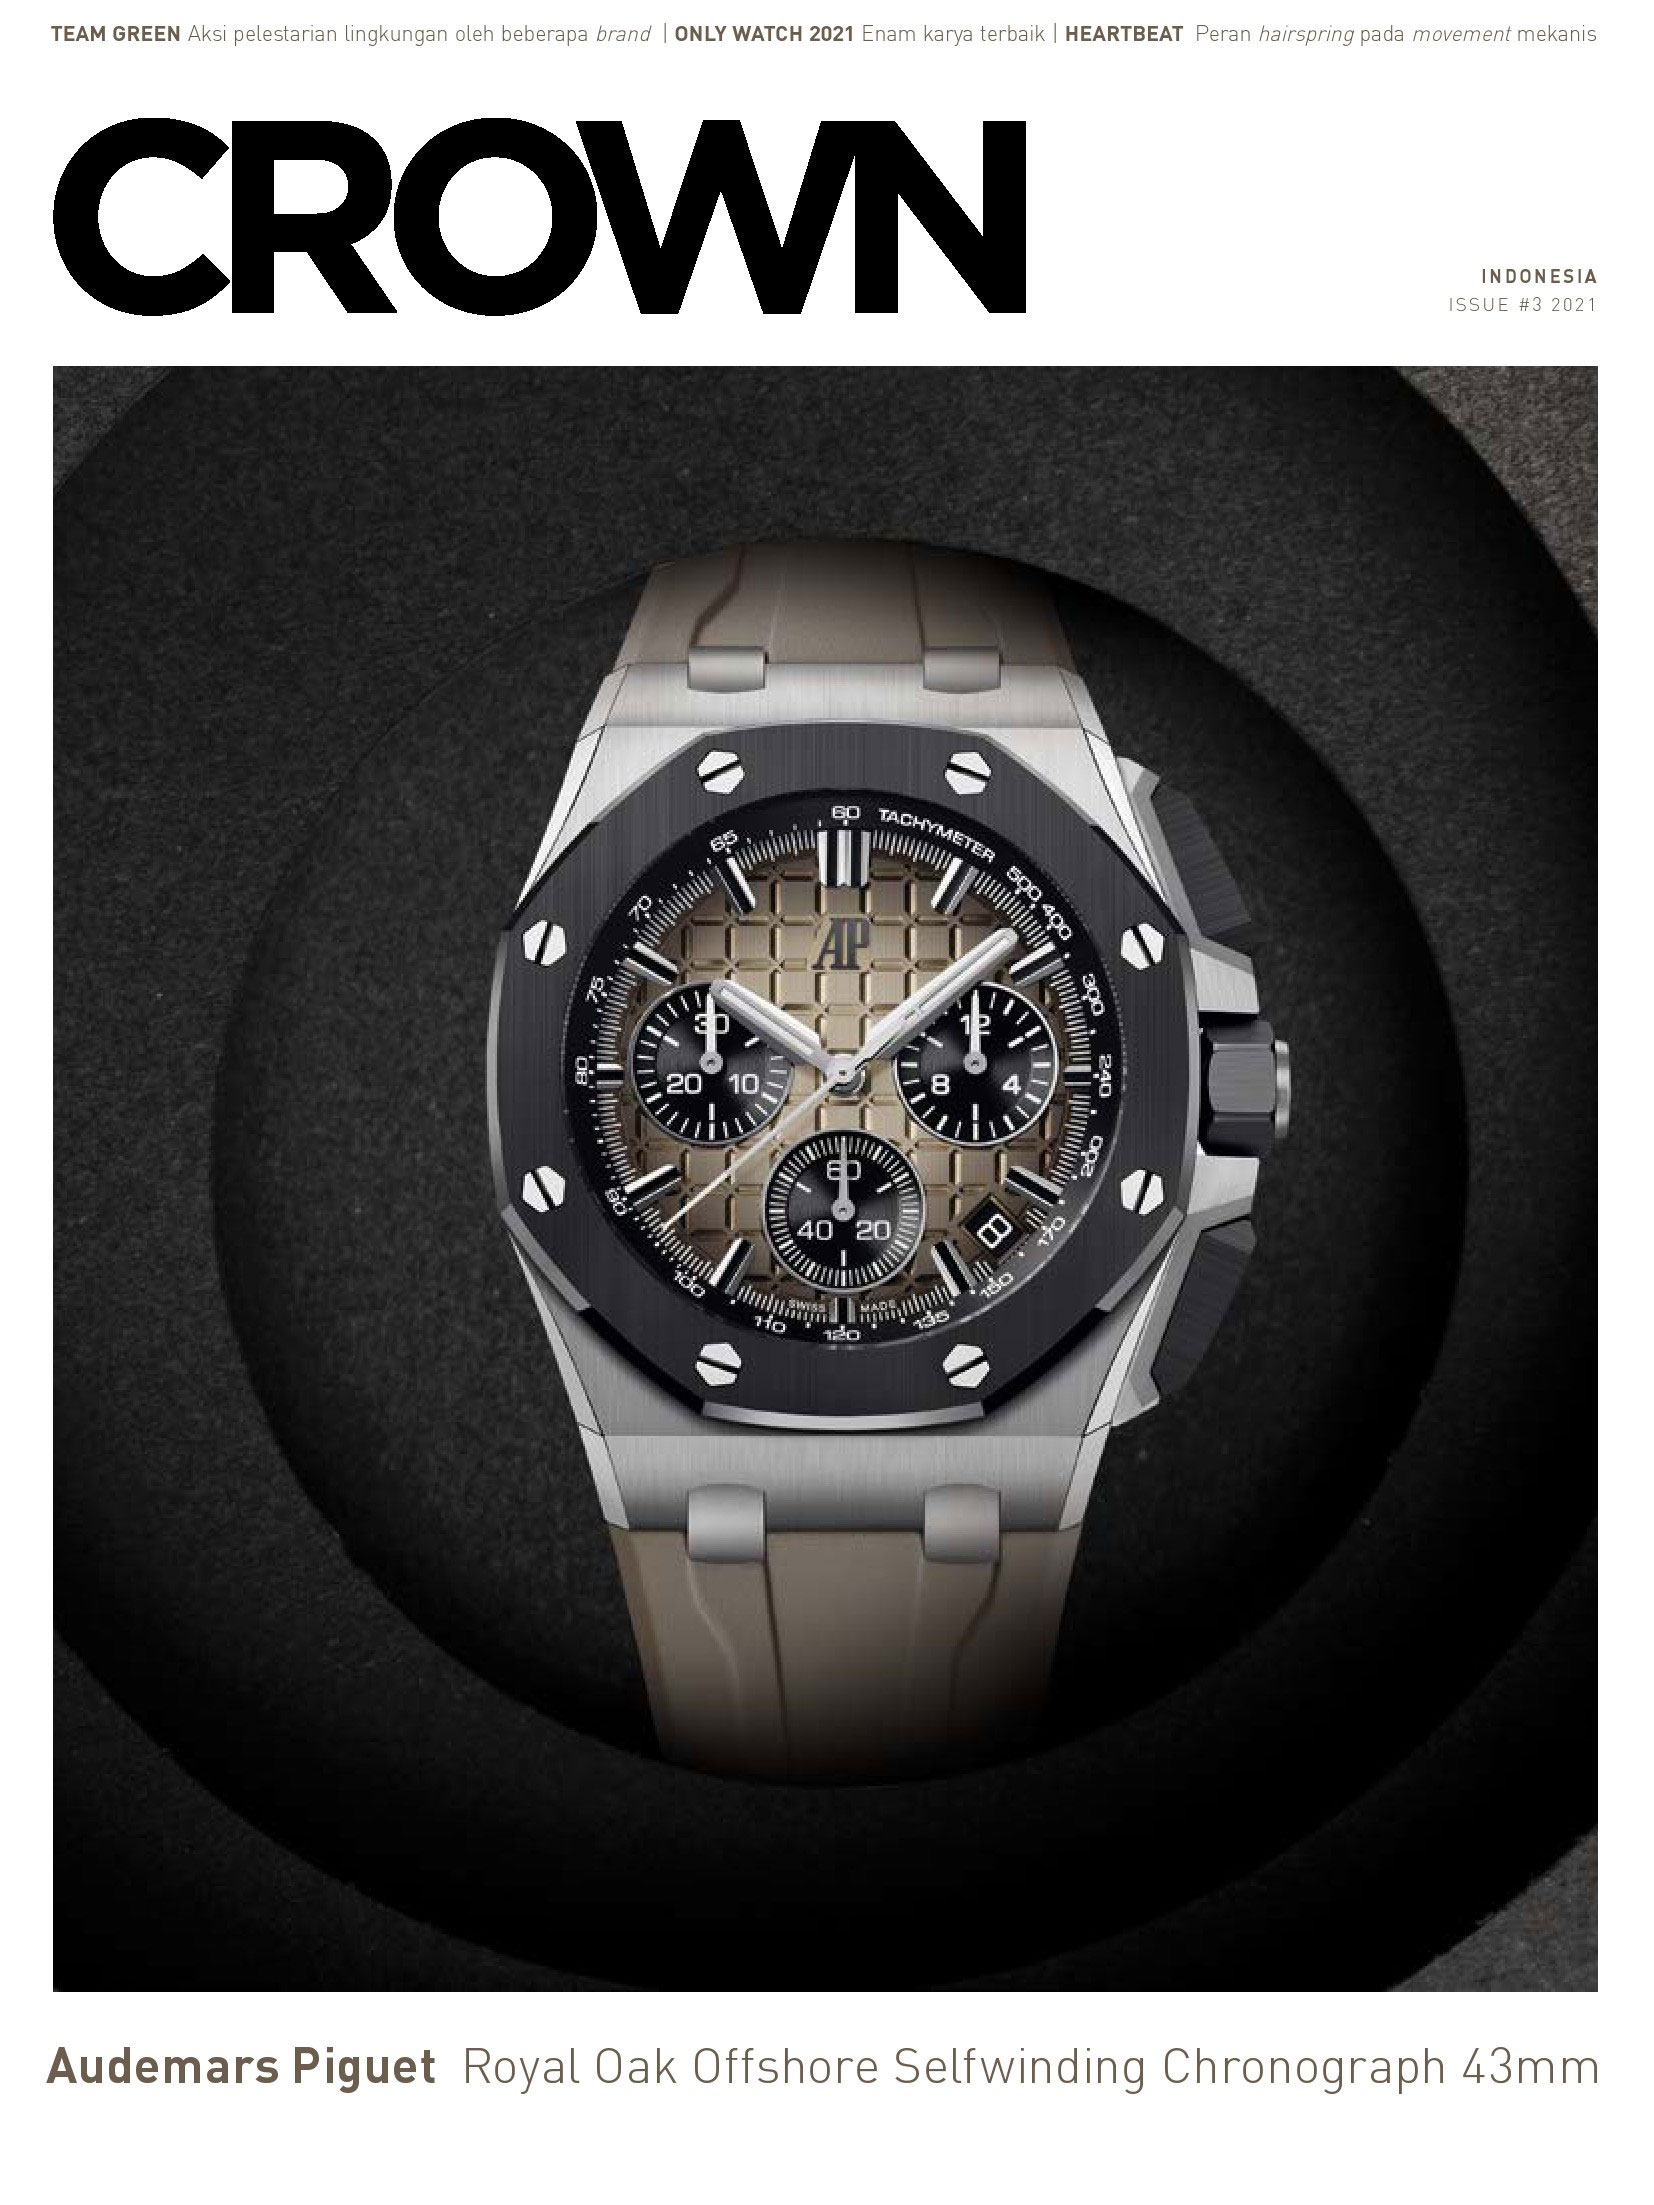 CROWN COVER STORY